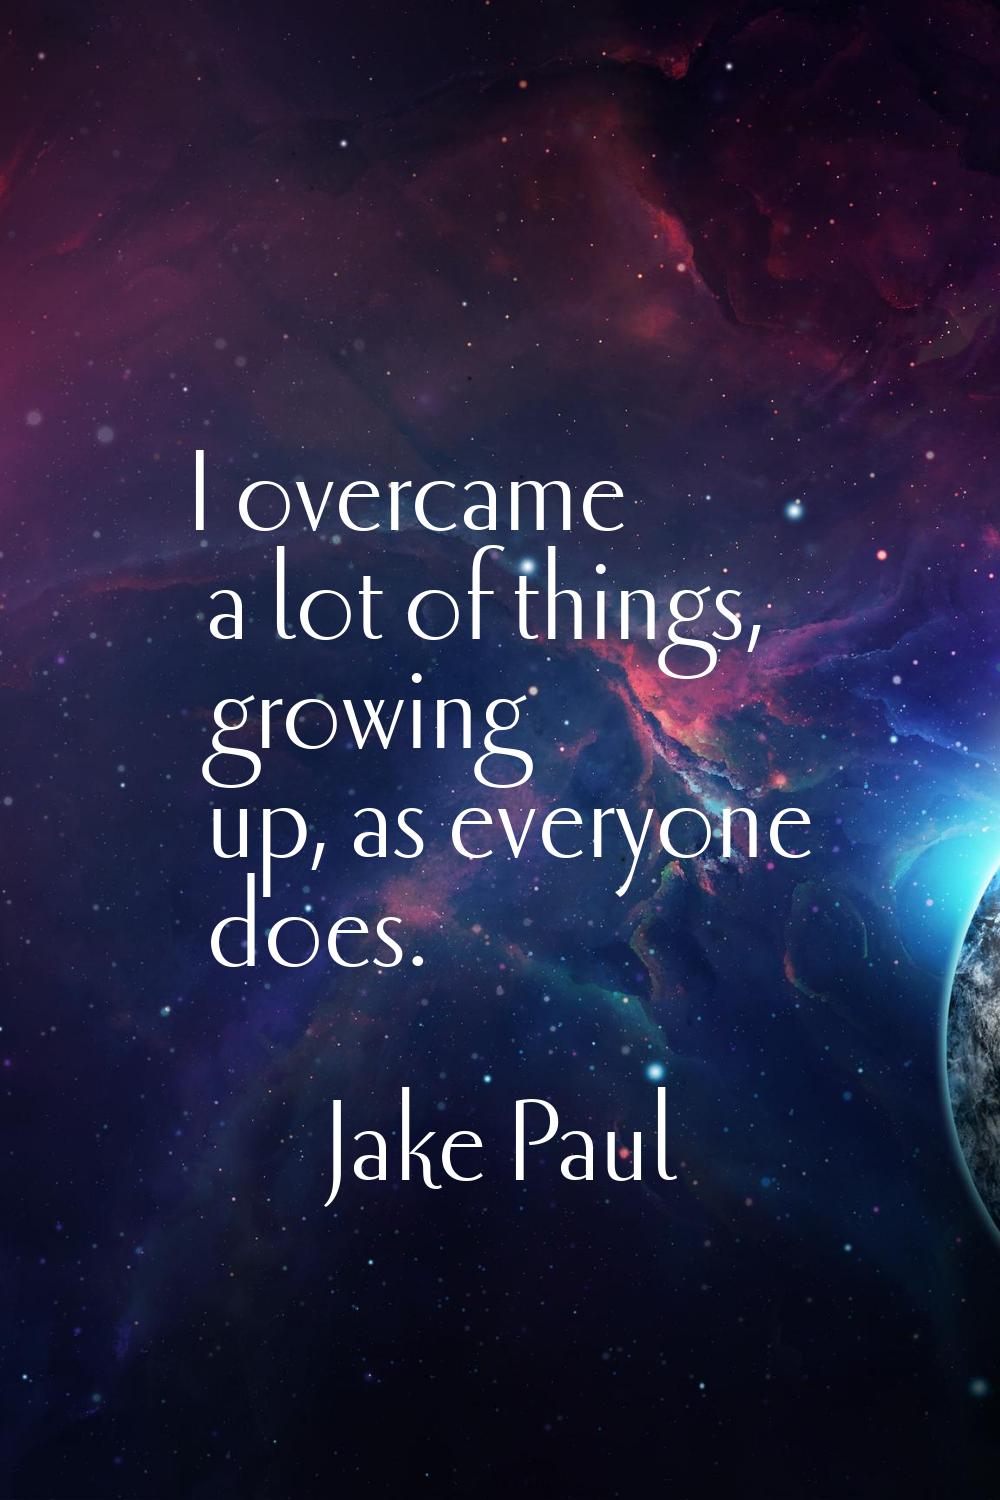 I overcame a lot of things, growing up, as everyone does.